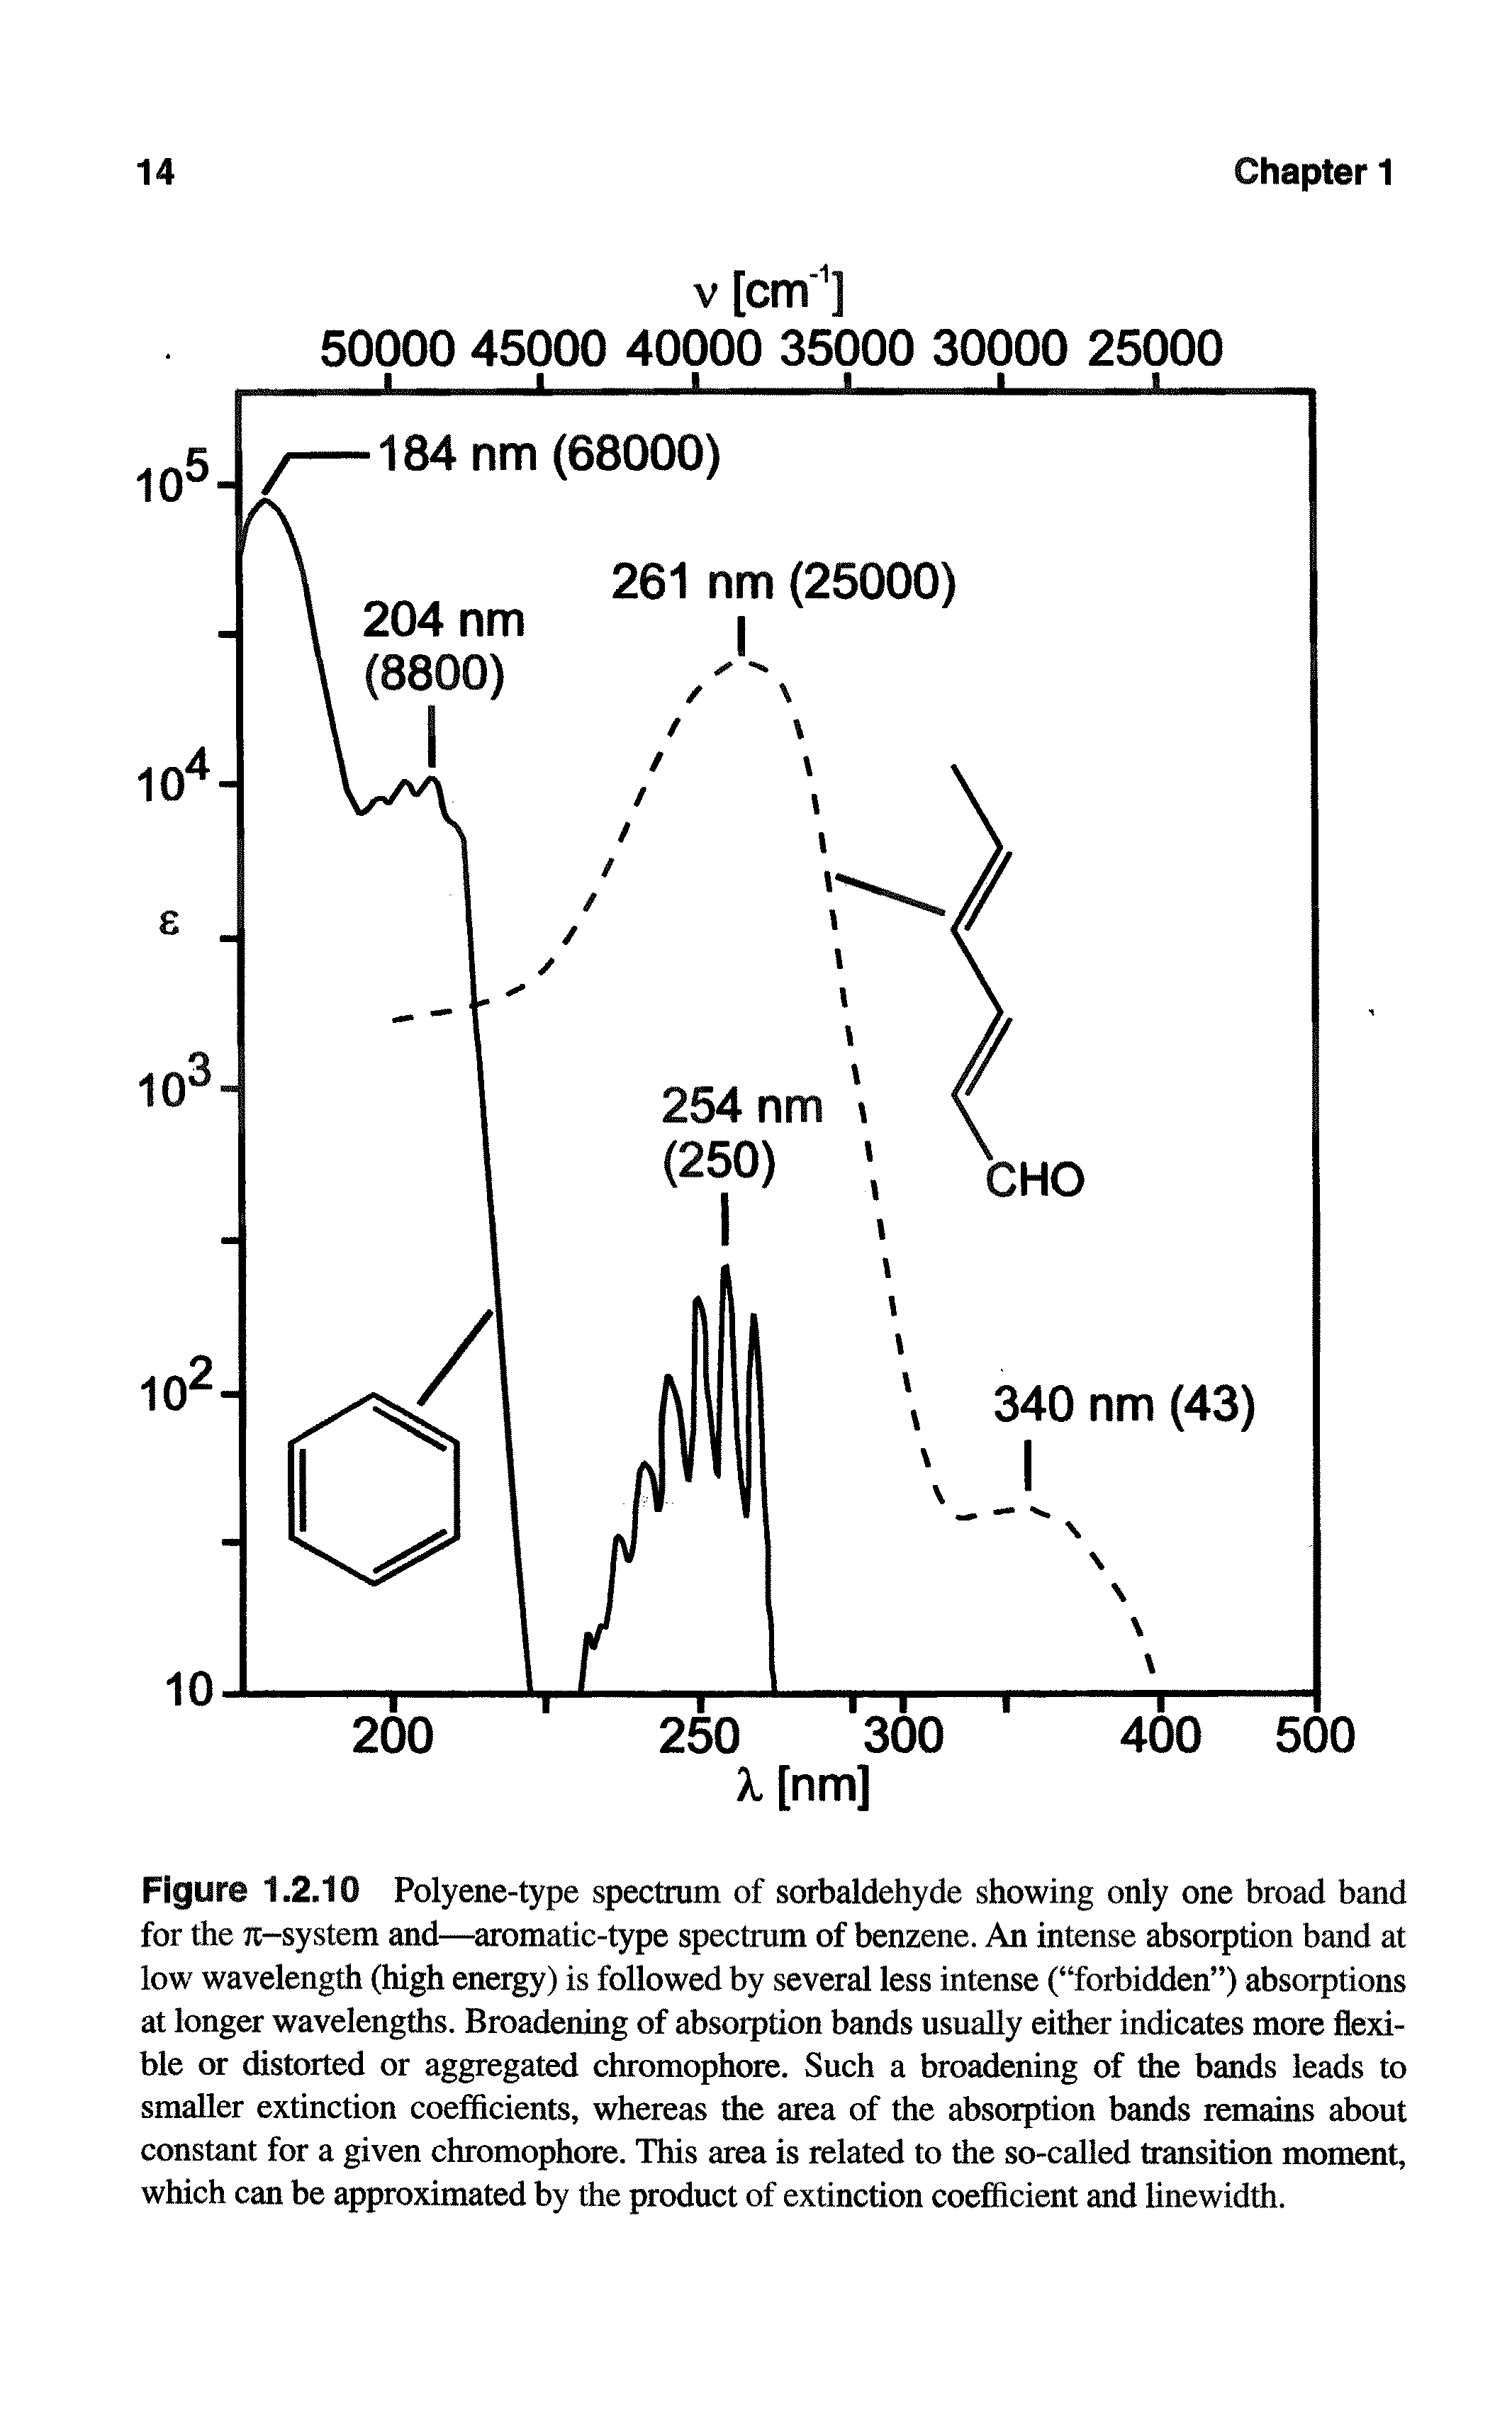 Figure 1.2.10 Polyene-type spectrum of sorbaldehyde showing only one broad band for the 7t-system and—aromatic-type spectrum of benzene. An intense absorption band at low wavelength (high energy) is followed by several less intense ( forbidden ) absorptions at longer wavelengths. Broadening of abso tion bands usually either indicates more flexible or distorted or aggregated chromophore. Such a broadening of the bands leads to smaller extinction coefficients, whereas the area of the absorption bands remains about constant for a given chromophore. This area is related to the so-called transition moment, which can be approximated by the product of extinction coefficient and linewidth.